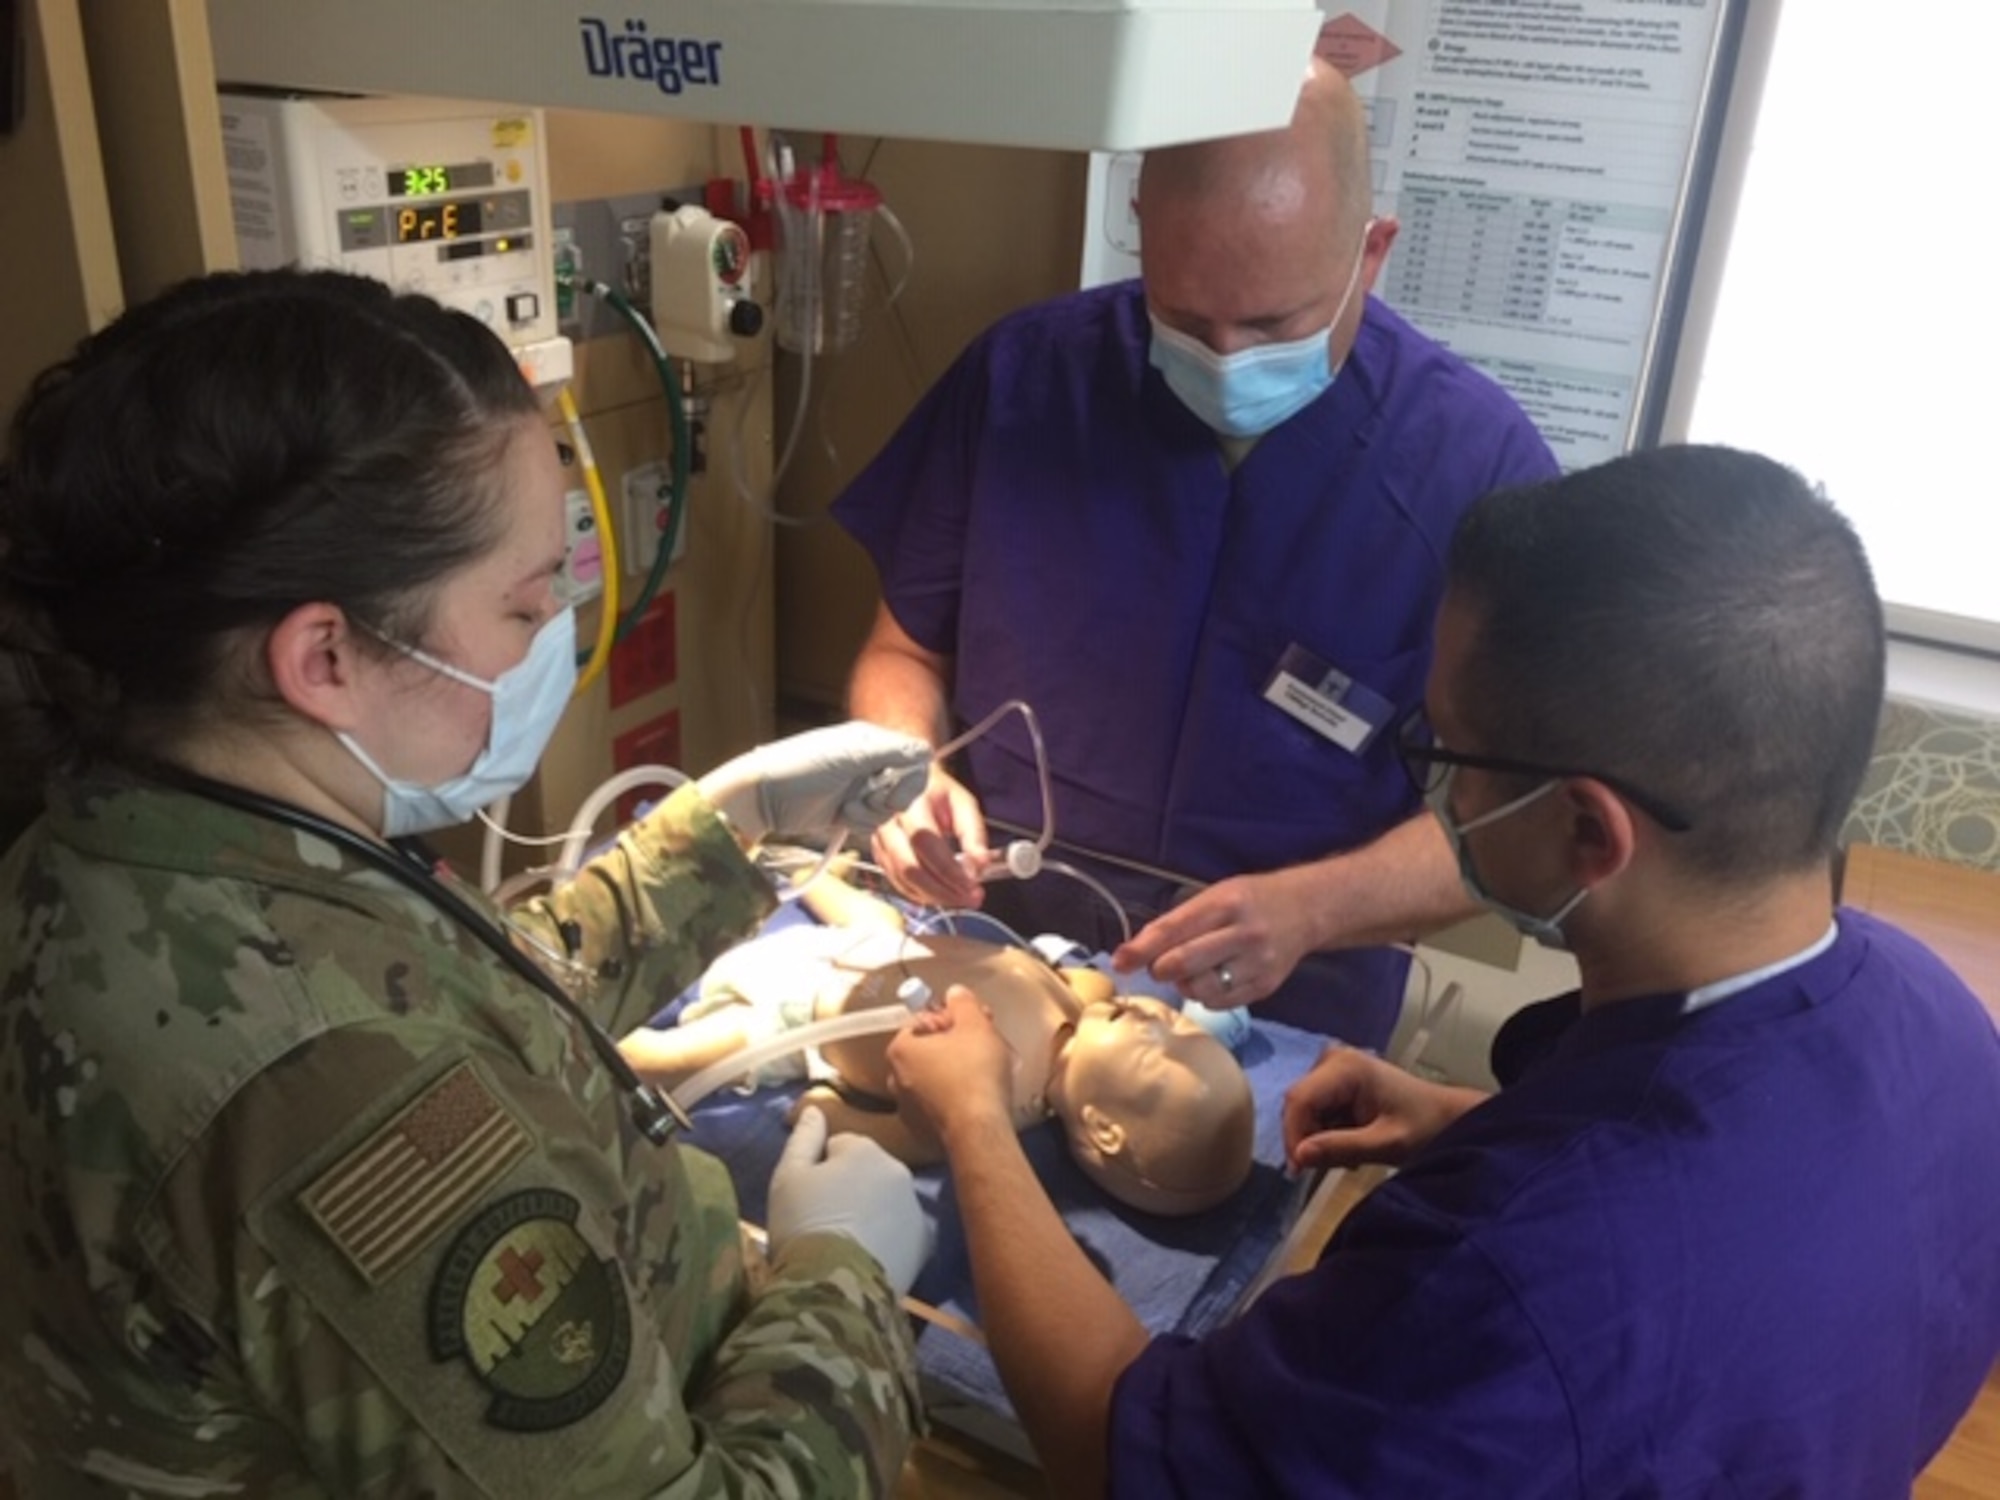 Three airman treat an infant mannequin in a hospital